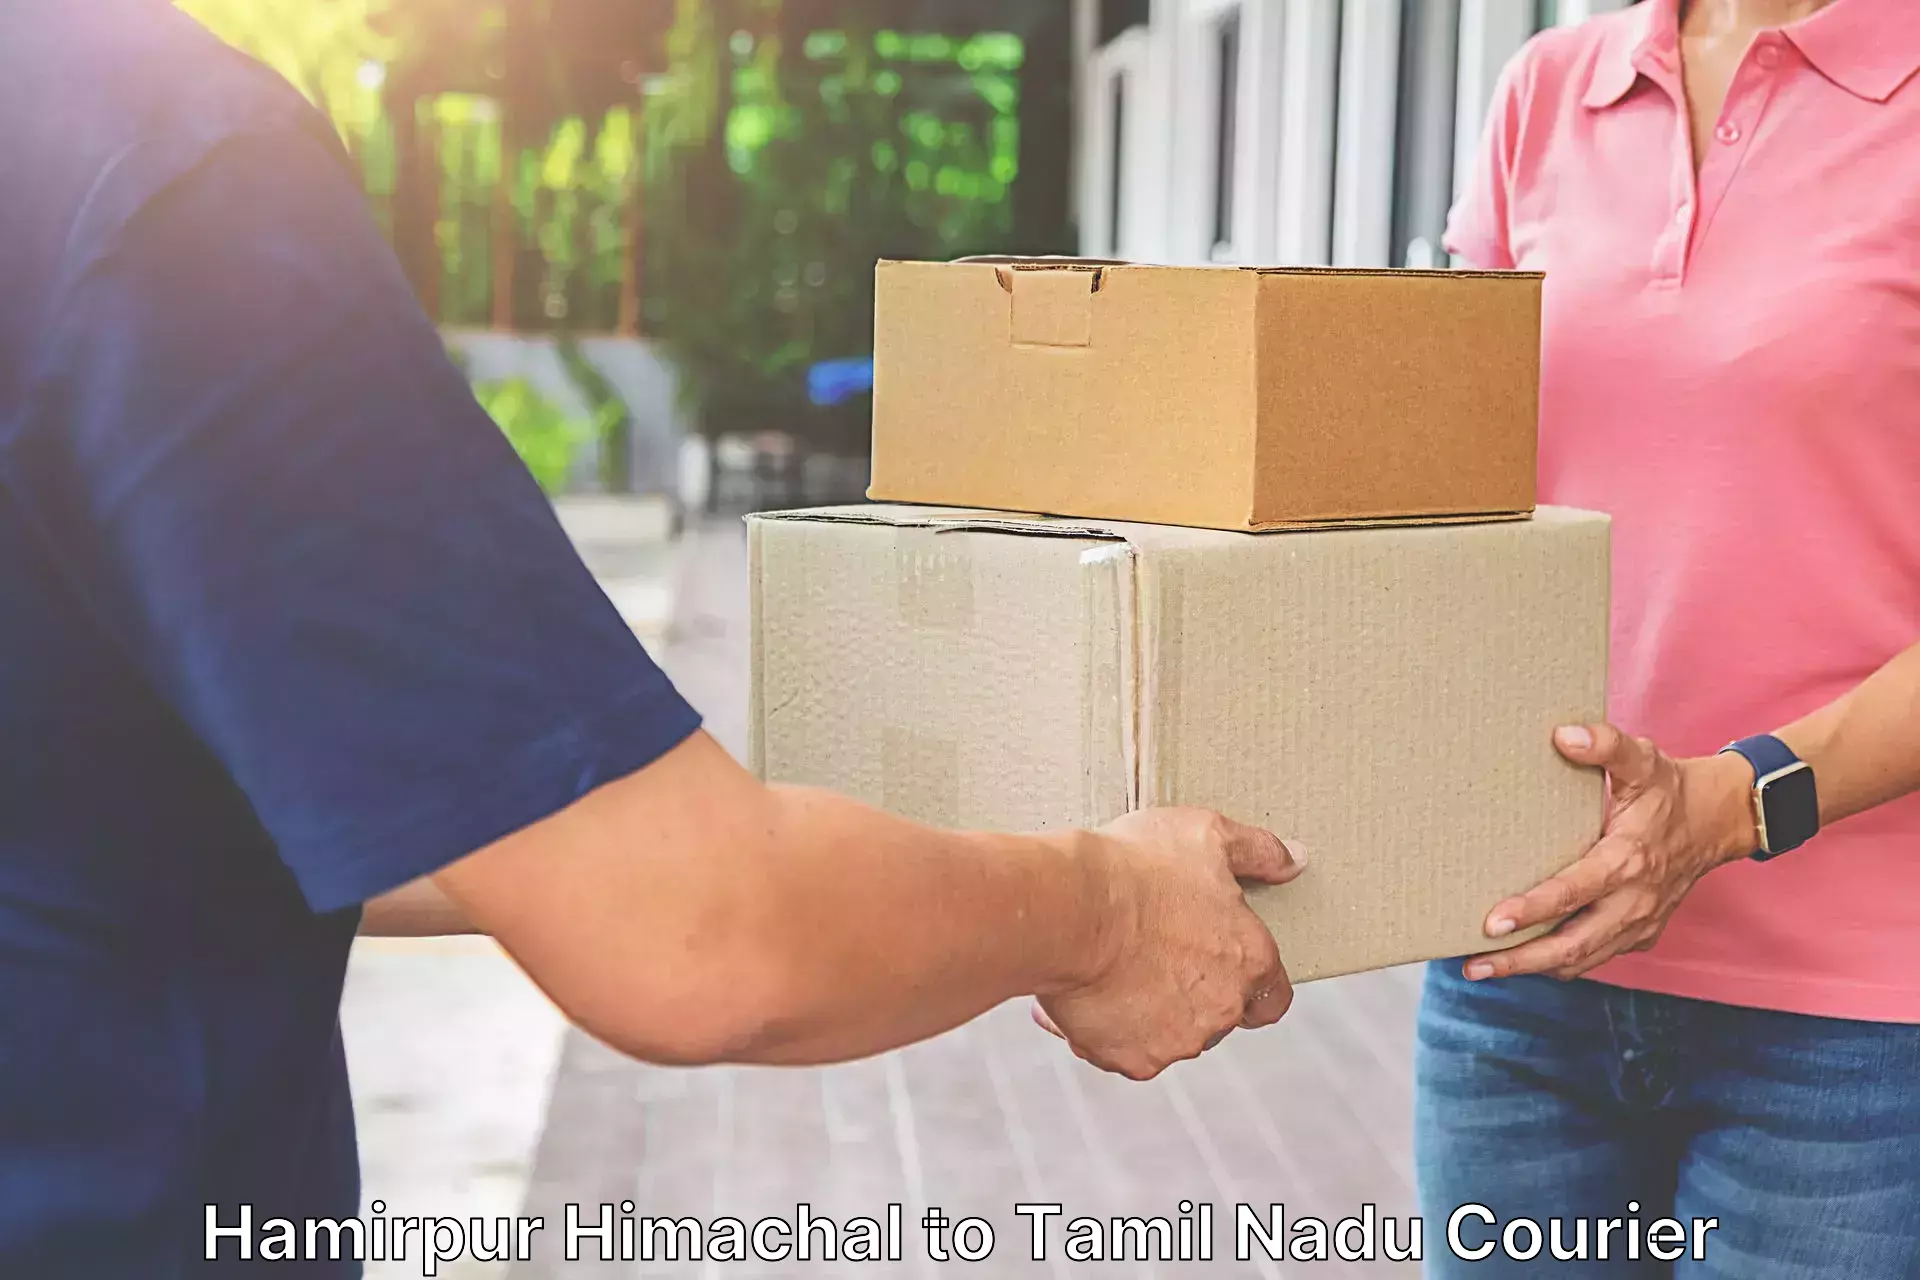 Multi-national courier services Hamirpur Himachal to Ayyampettai